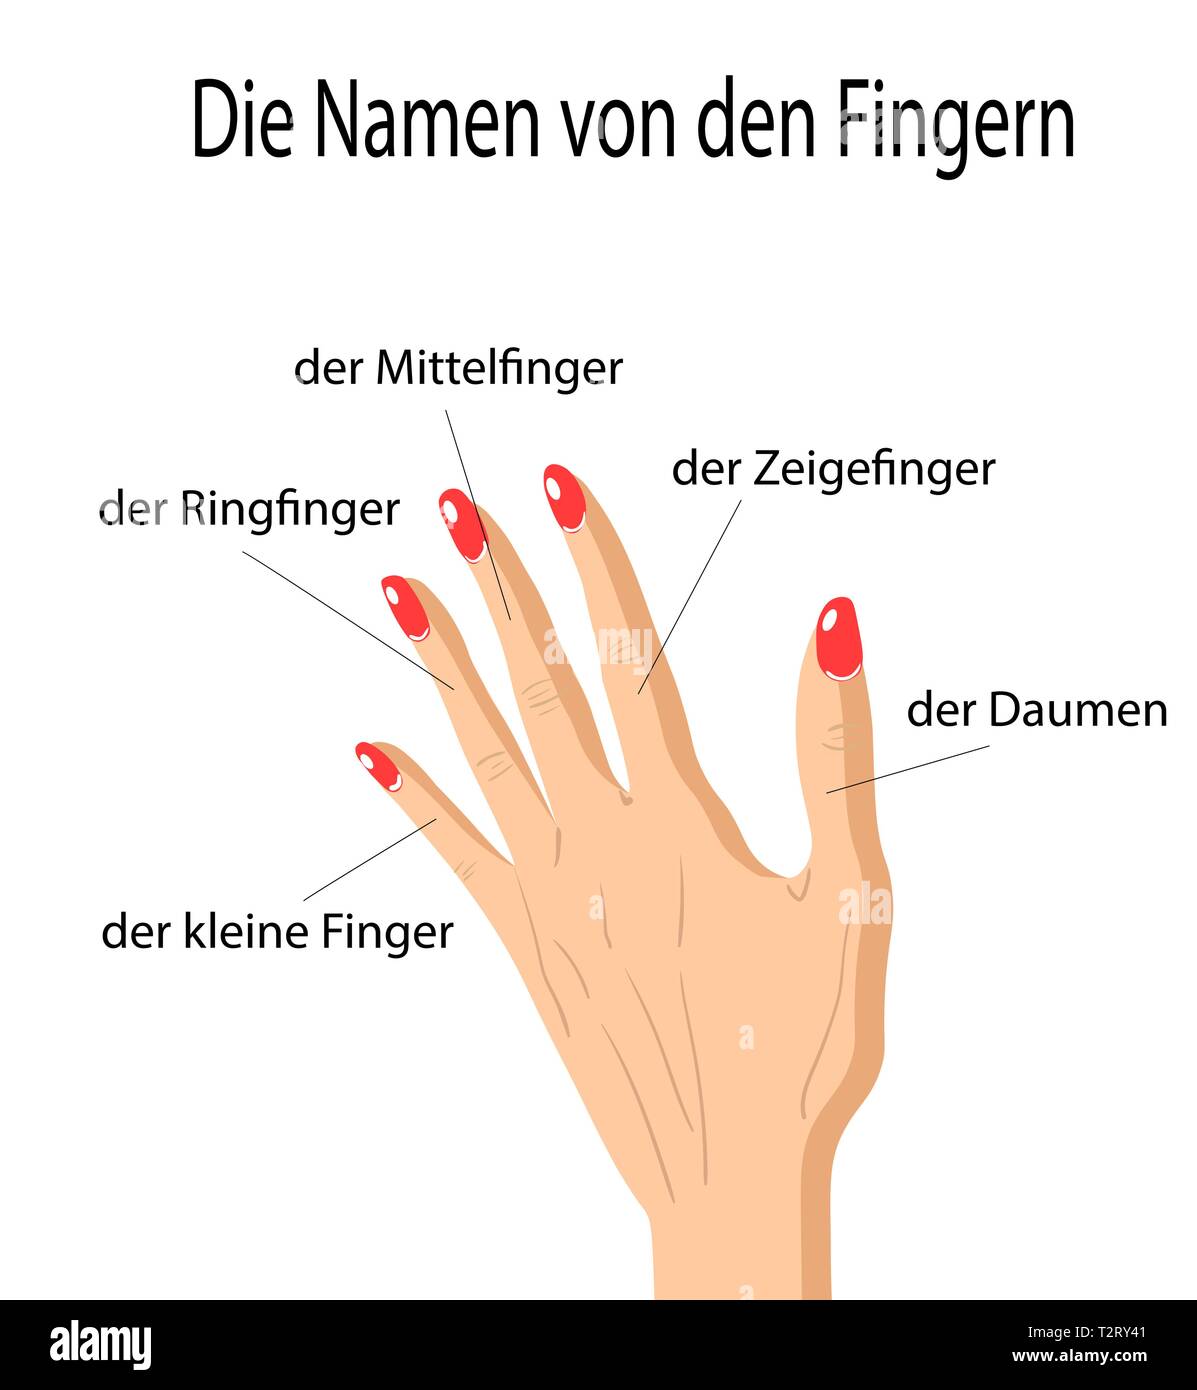 https://c8.alamy.com/comp/T2RY41/fingers-names-of-human-body-parts-in-german-language-a-hand-drawn-vector-cartoon-illustration-of-human-fingers-and-its-names-T2RY41.jpg